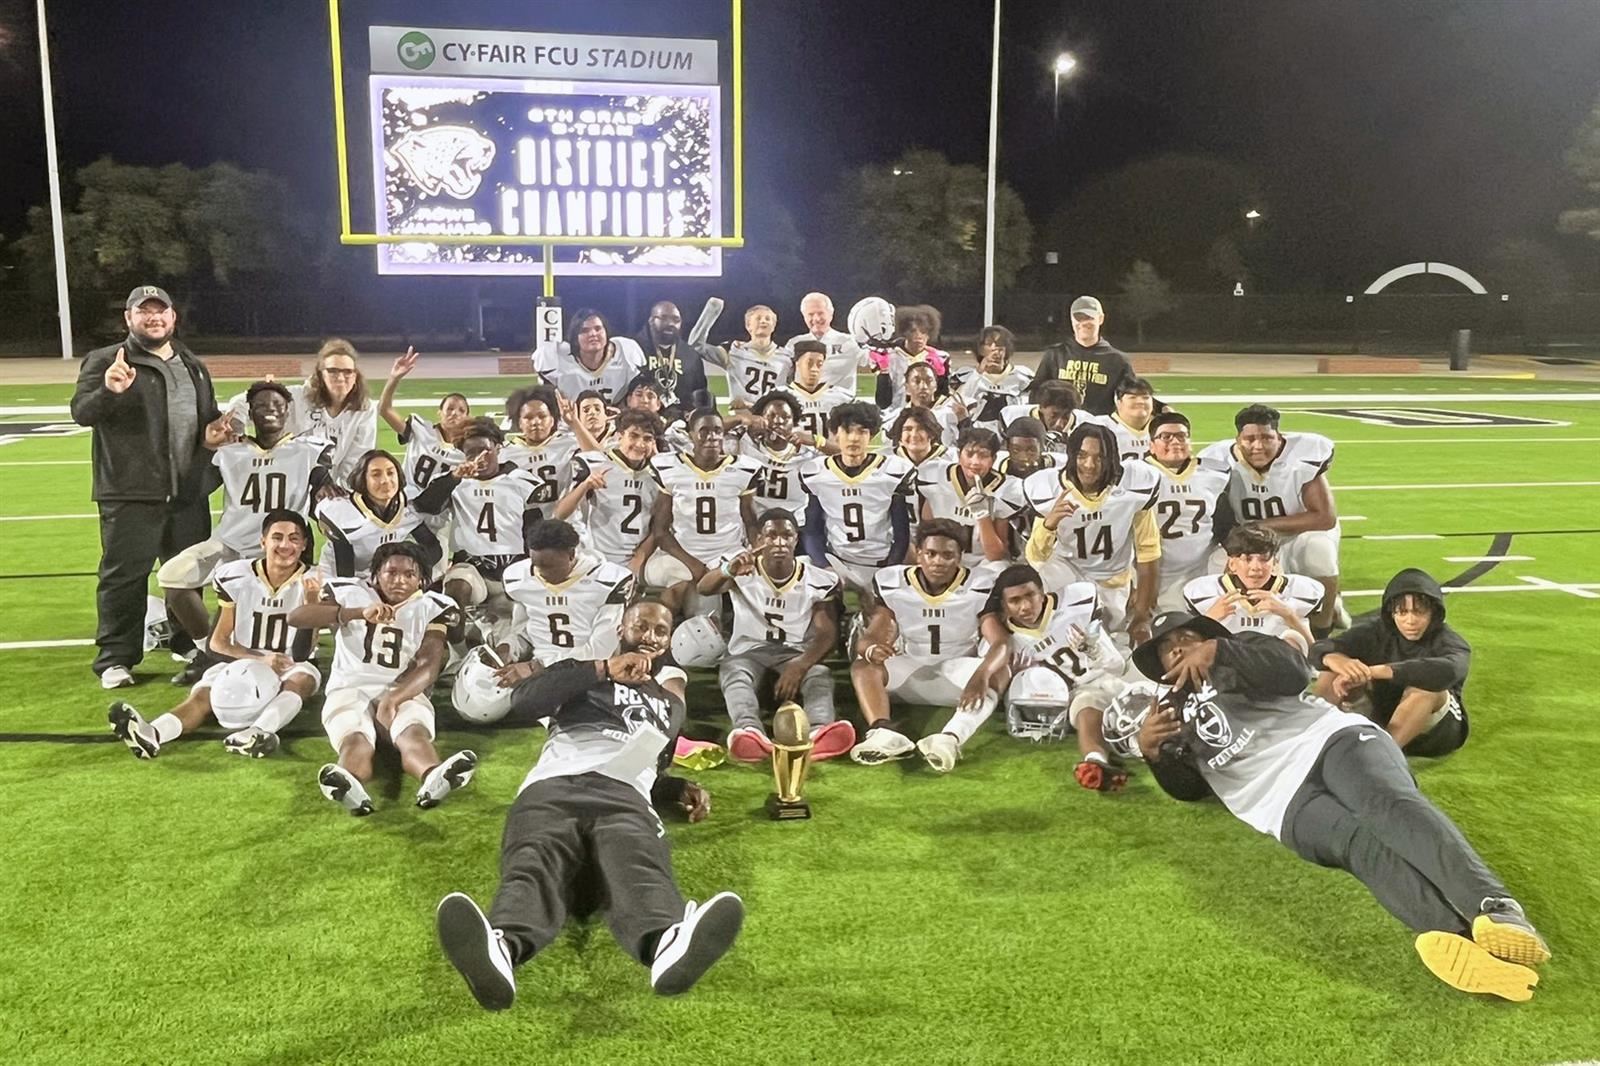 The Rowe 8B football team poses after defeating Hamilton to become the first-ever outright district championship.